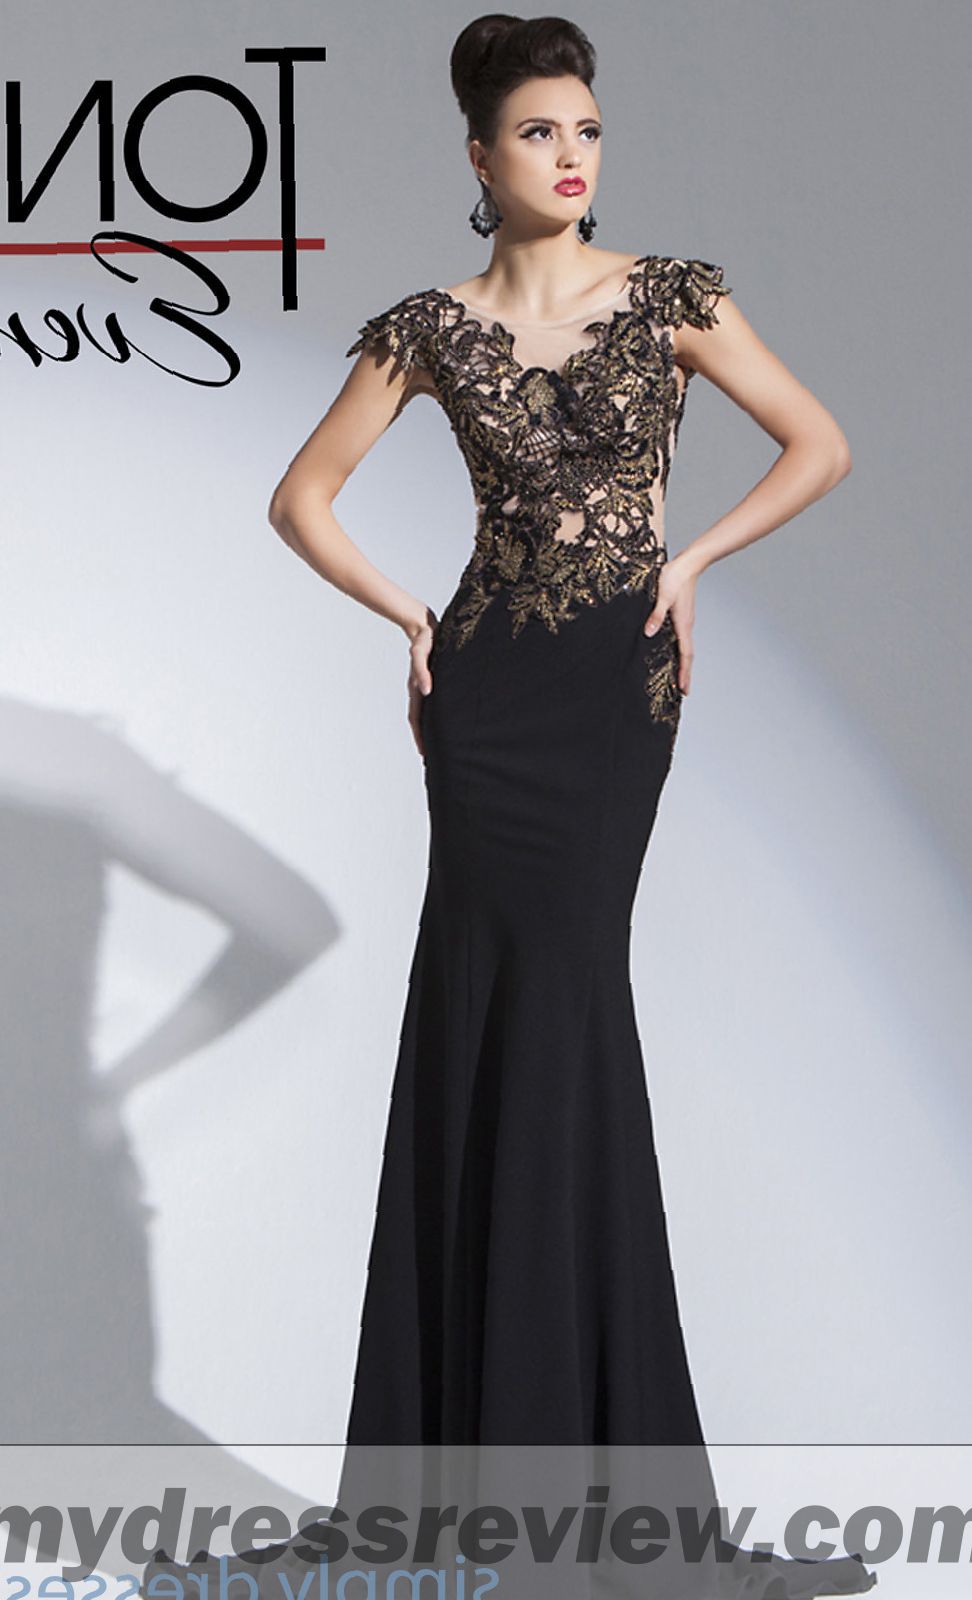 Black Prom Dress With Gold & 2017-2018